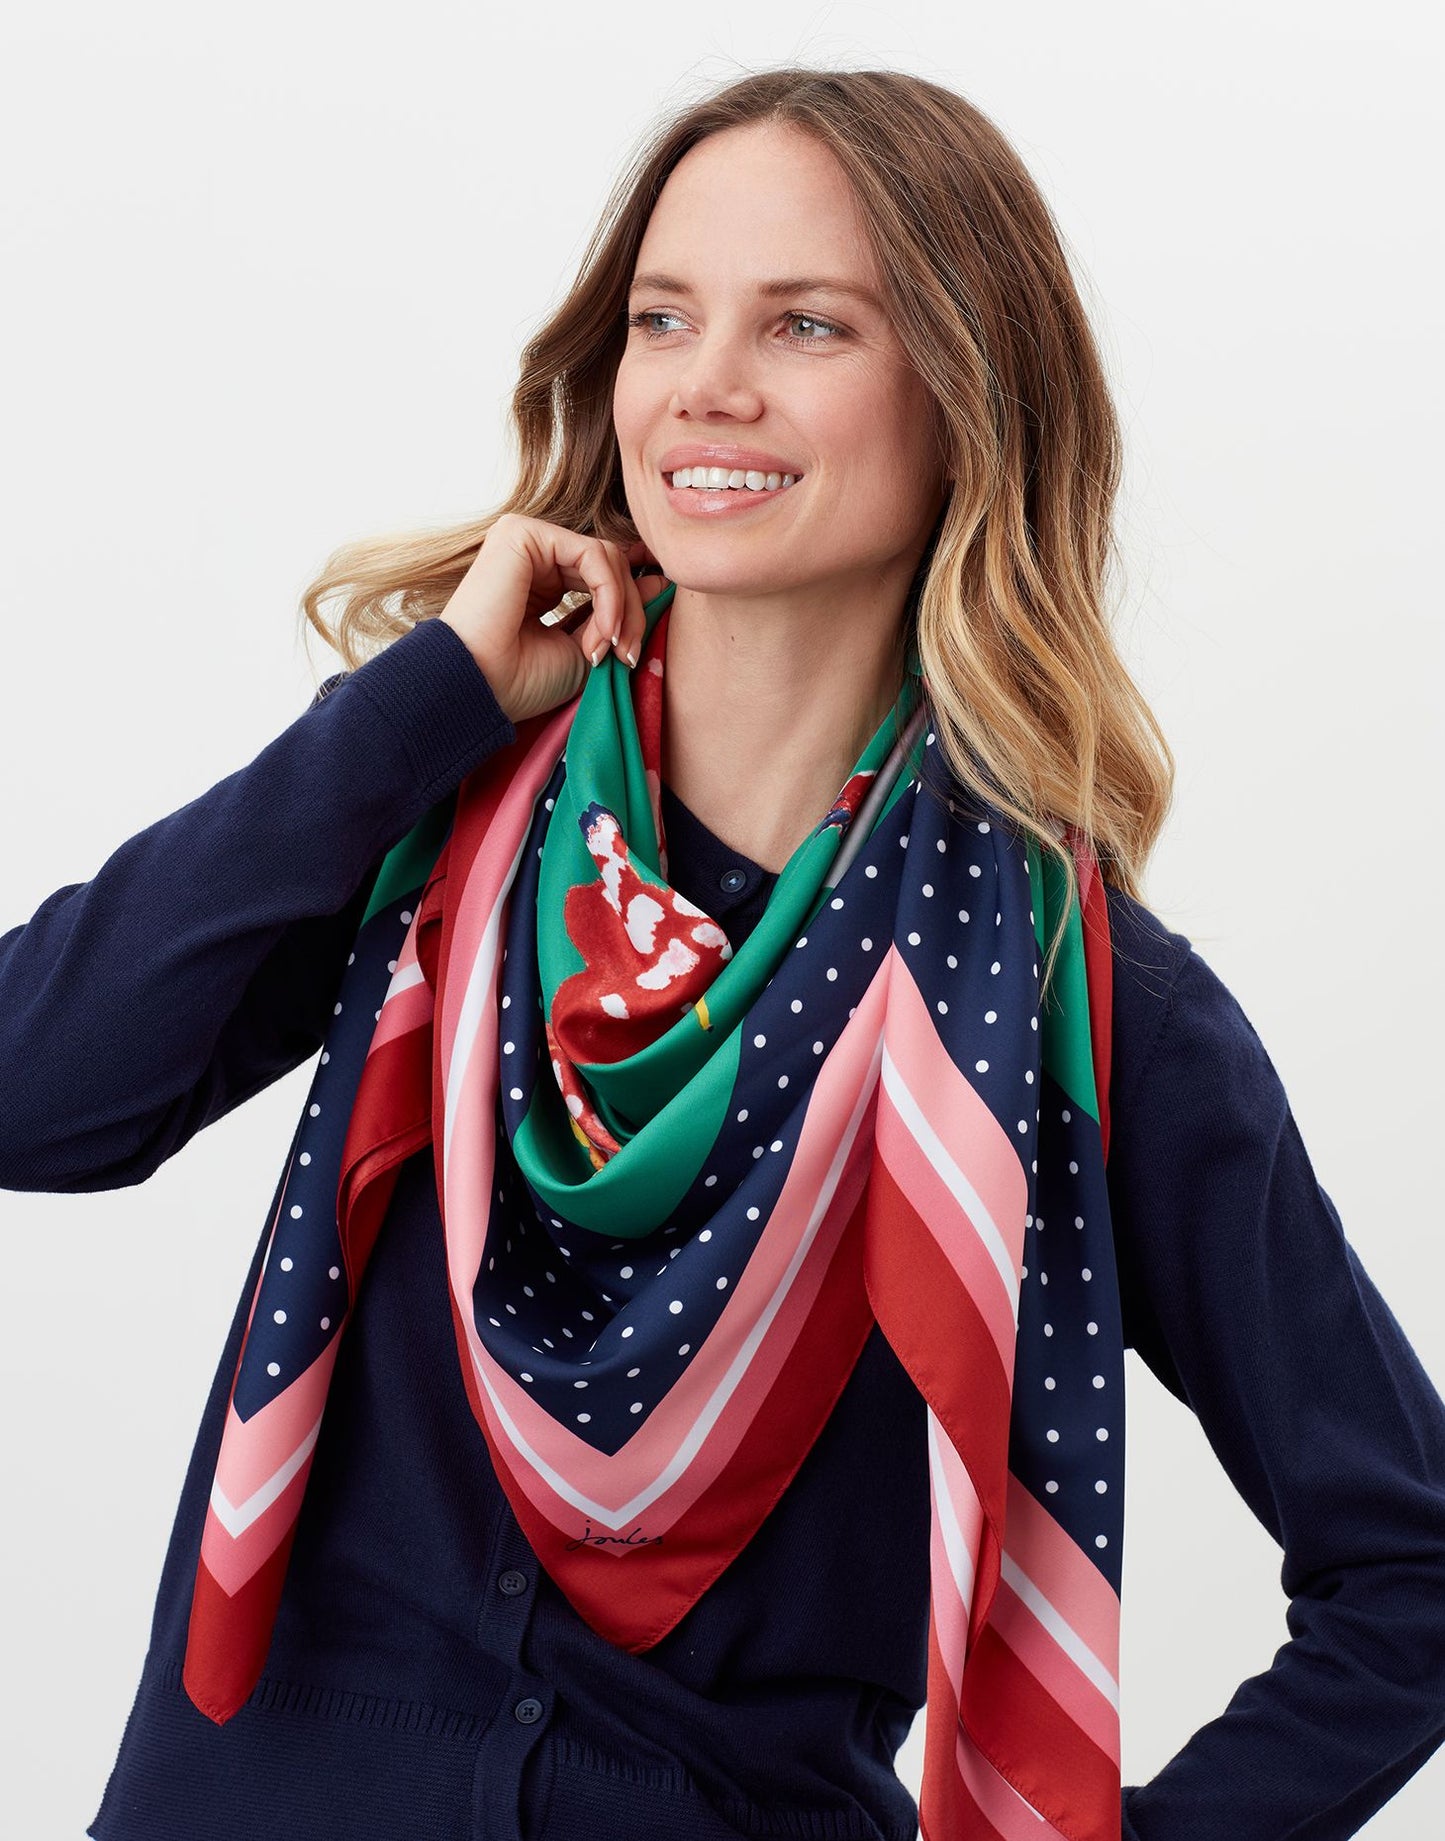 Joules Agatha Large Square Scarf